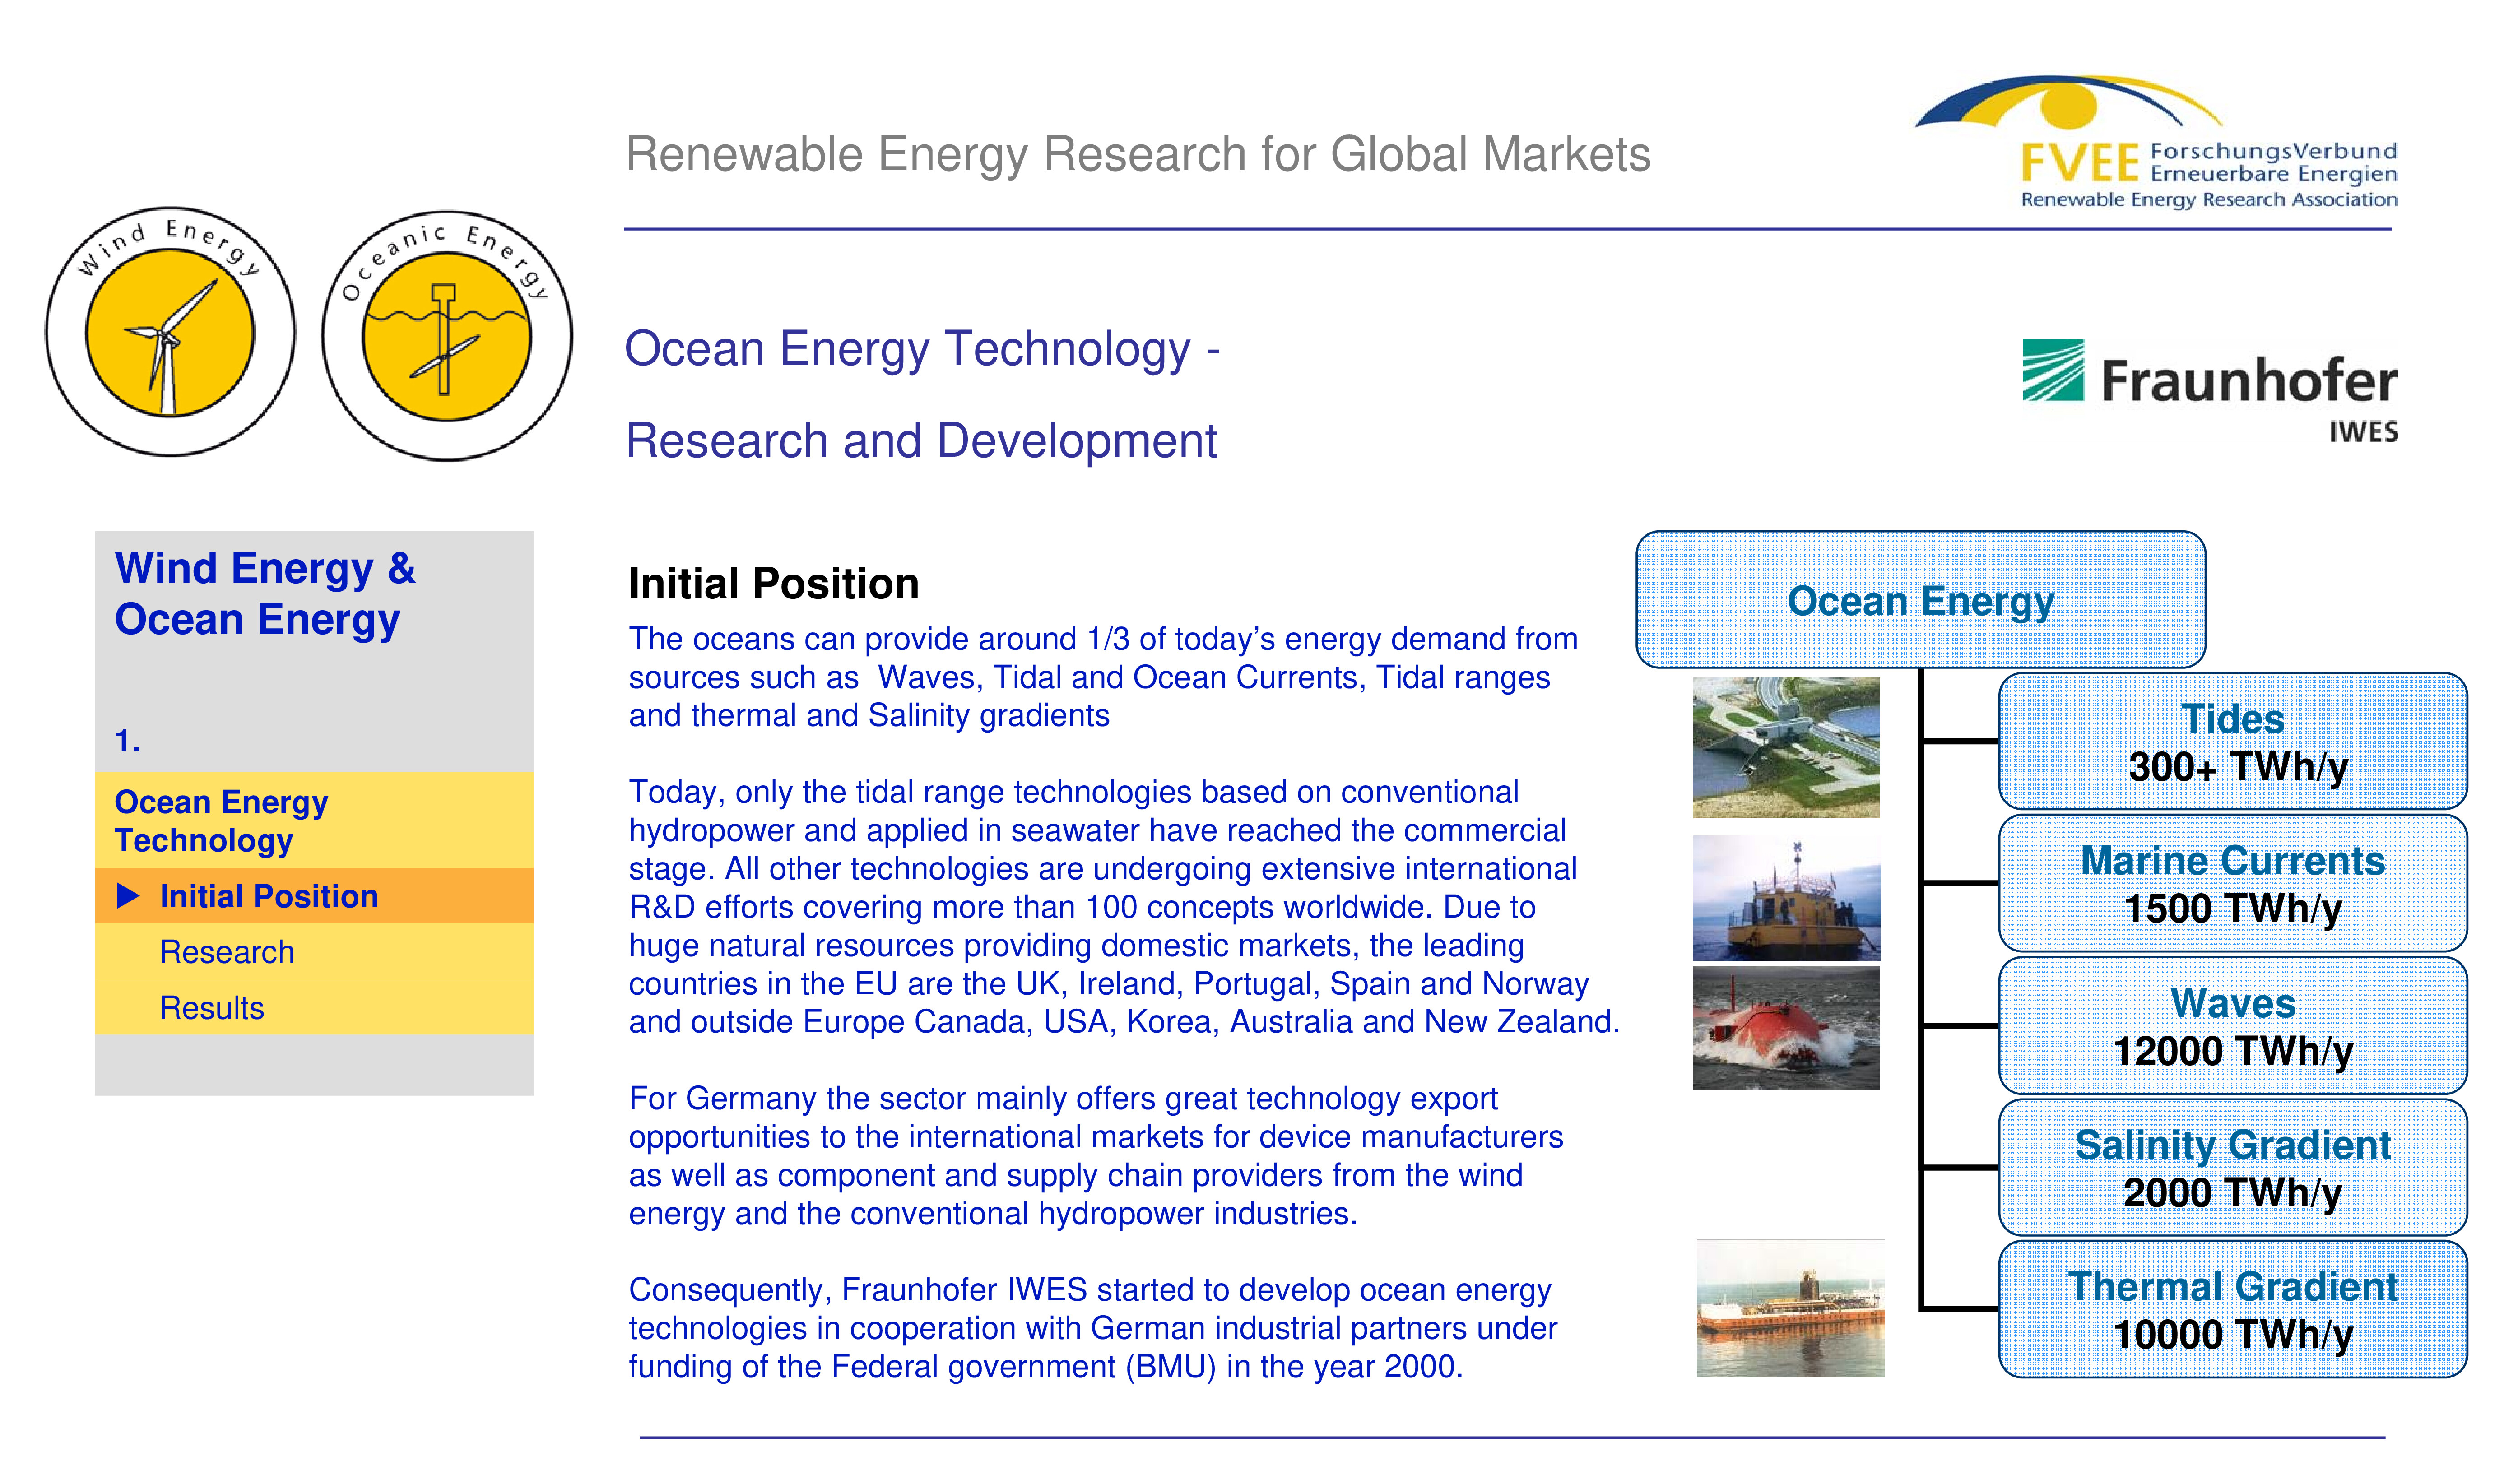 POSTER SESSION "Renewable Energy Research for Global Markets"